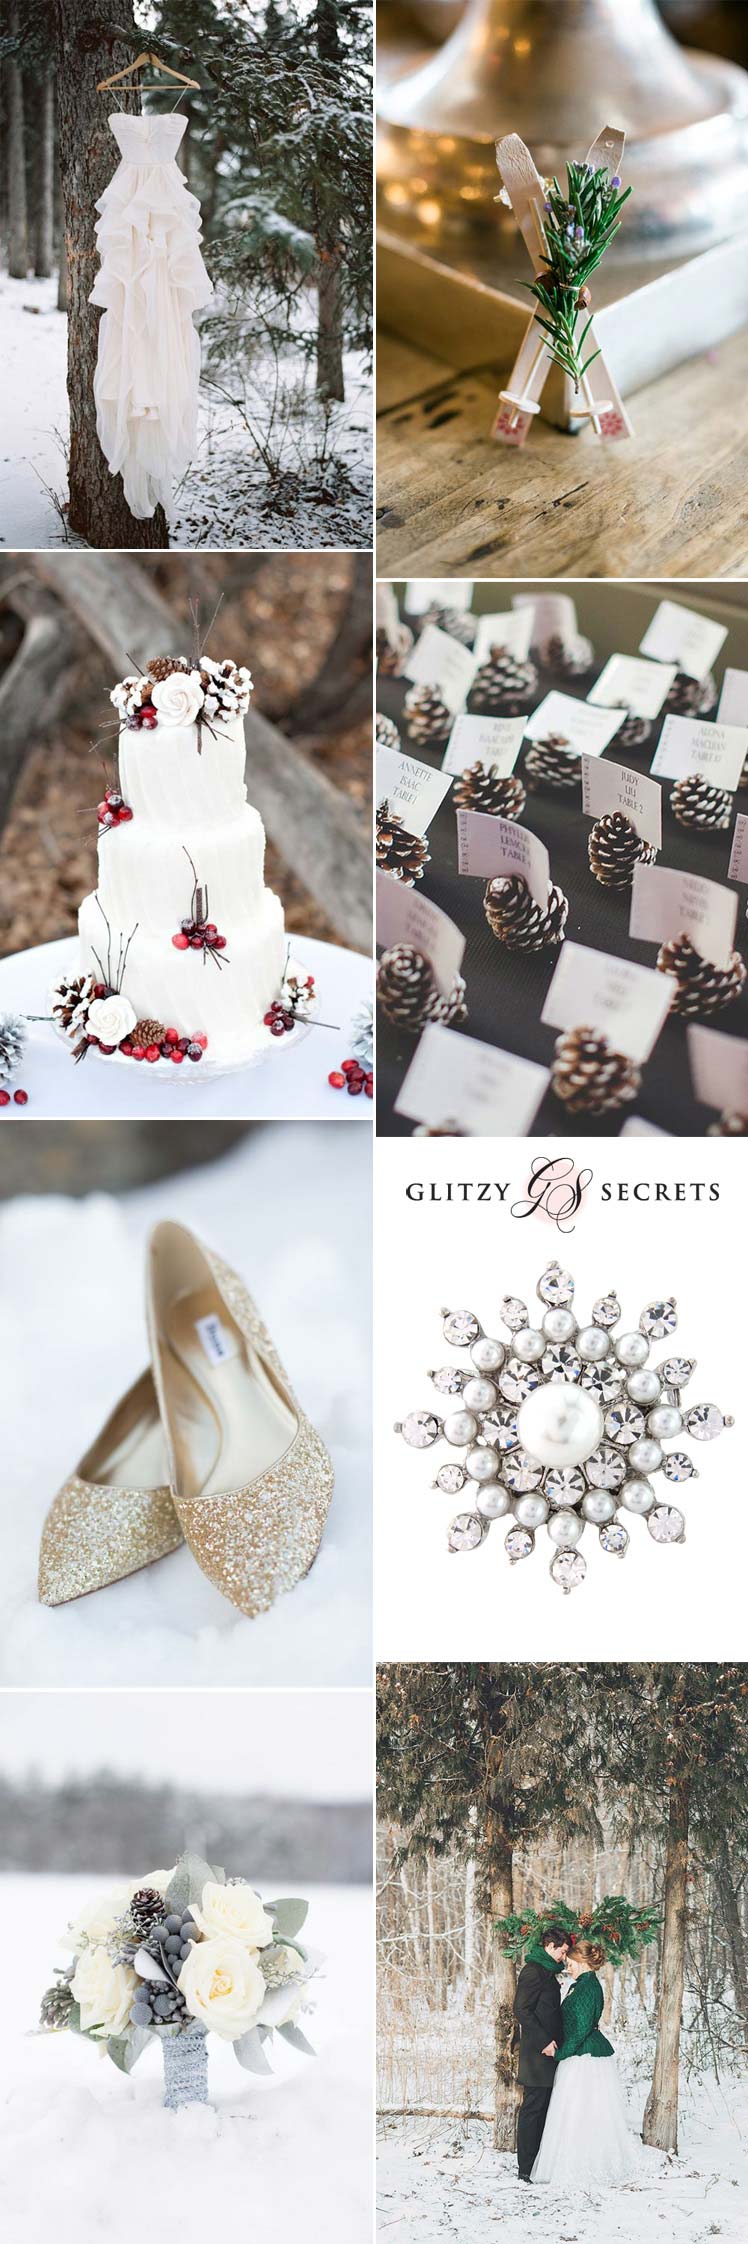 Snow wedding inspiration for your winter day